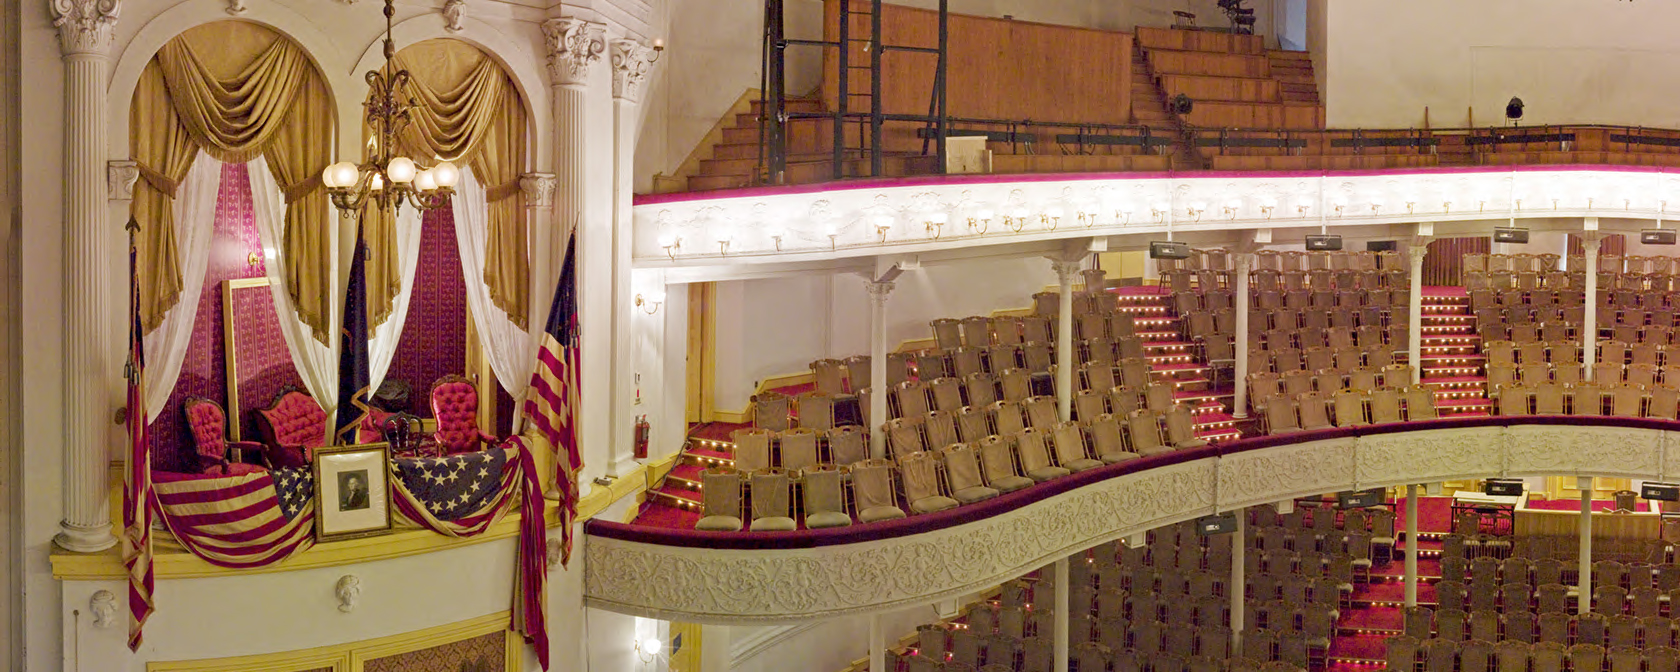 Fords Theater-Panoramablick